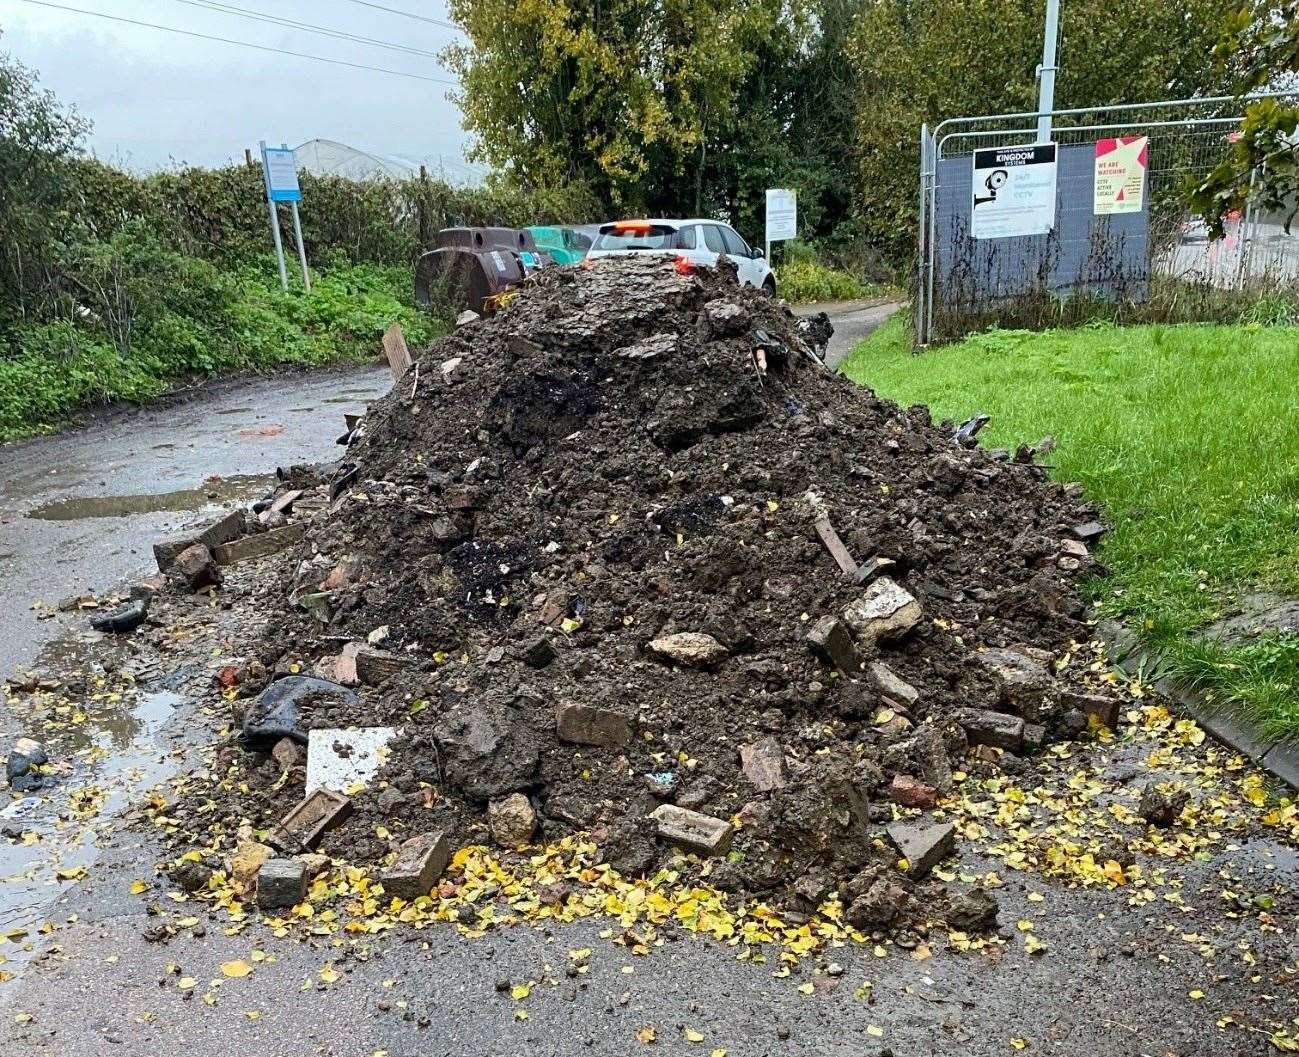 A sign warning people of the cameras can be seen behind the pile of soil. Picture: Dartford Borough Council